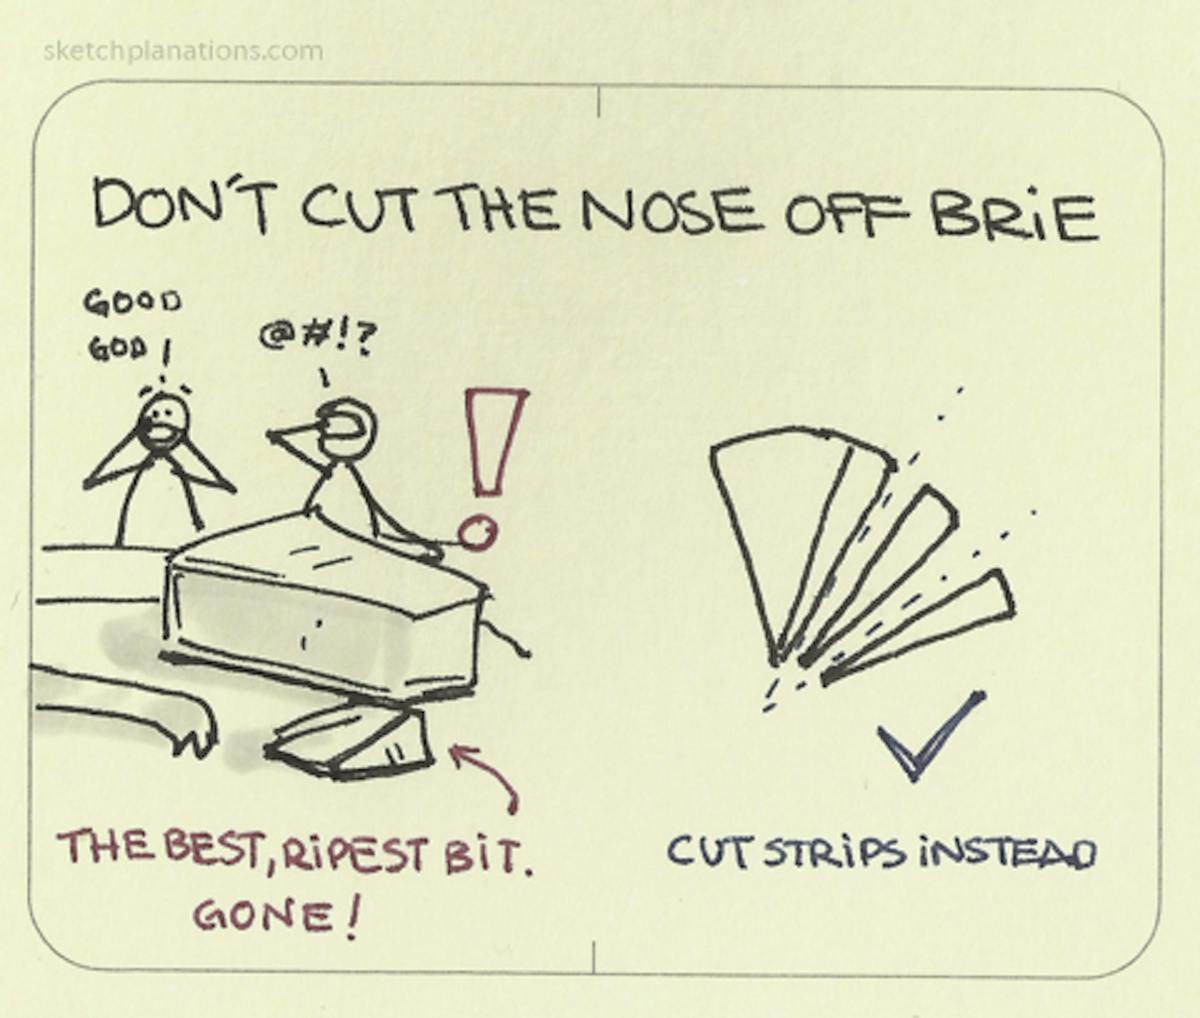 Don't cut the nose off brie - Sketchplanations